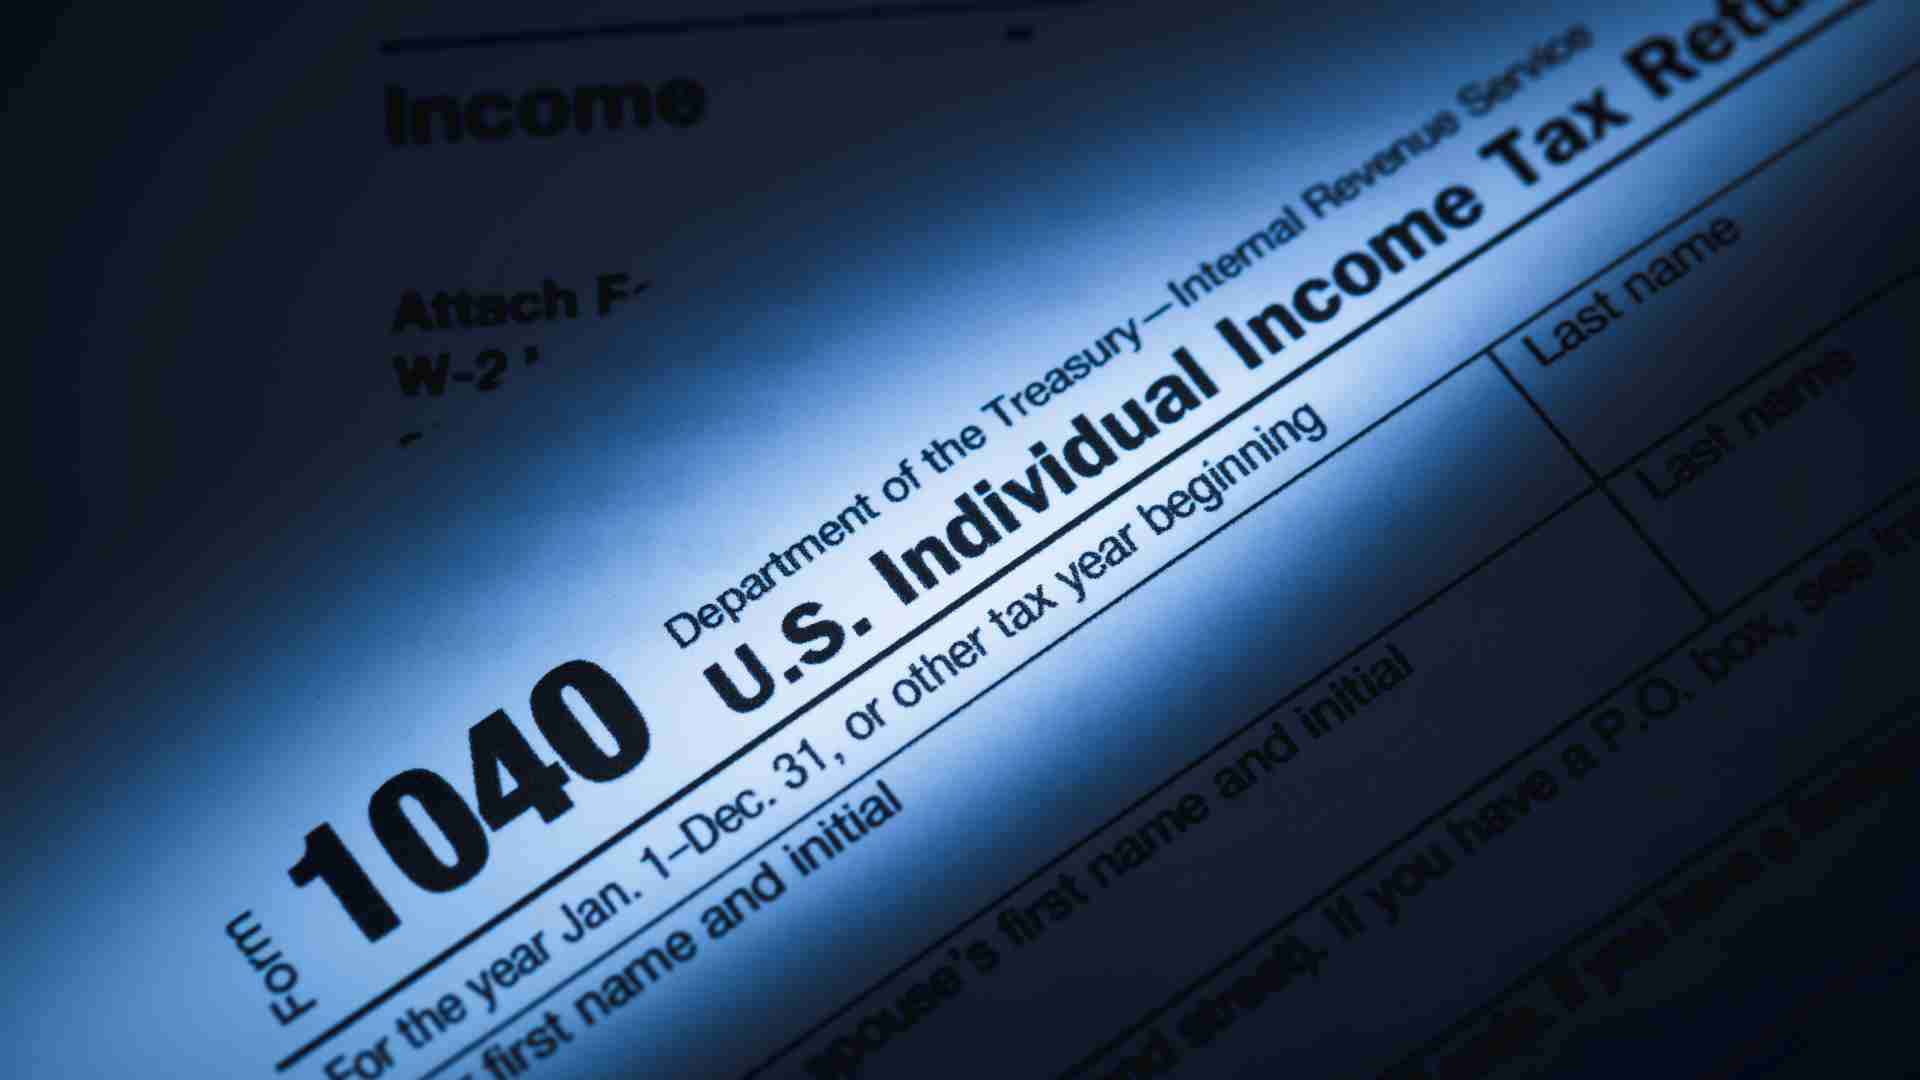 The IRS keeps improving and making things easier for taxpayers so they can get their tax refund ASAP